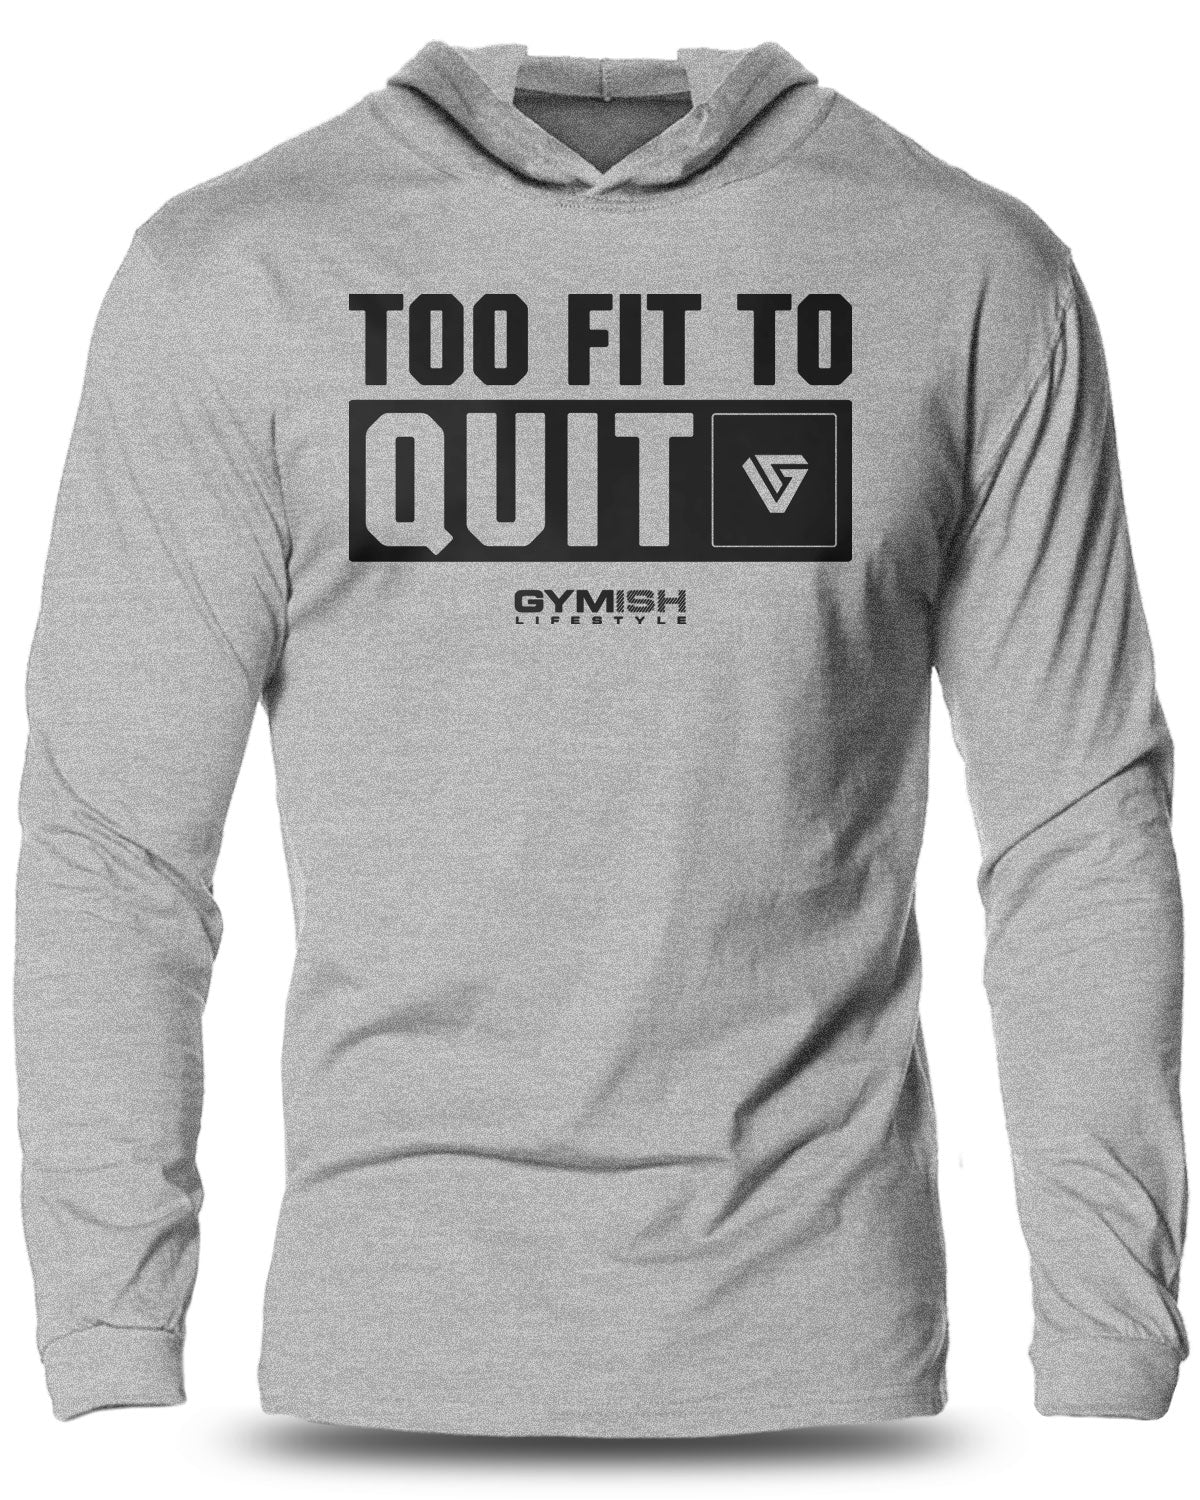 088- Too Fit To Quit Lightweight Long Sleeve Hooded T-shirt for Men